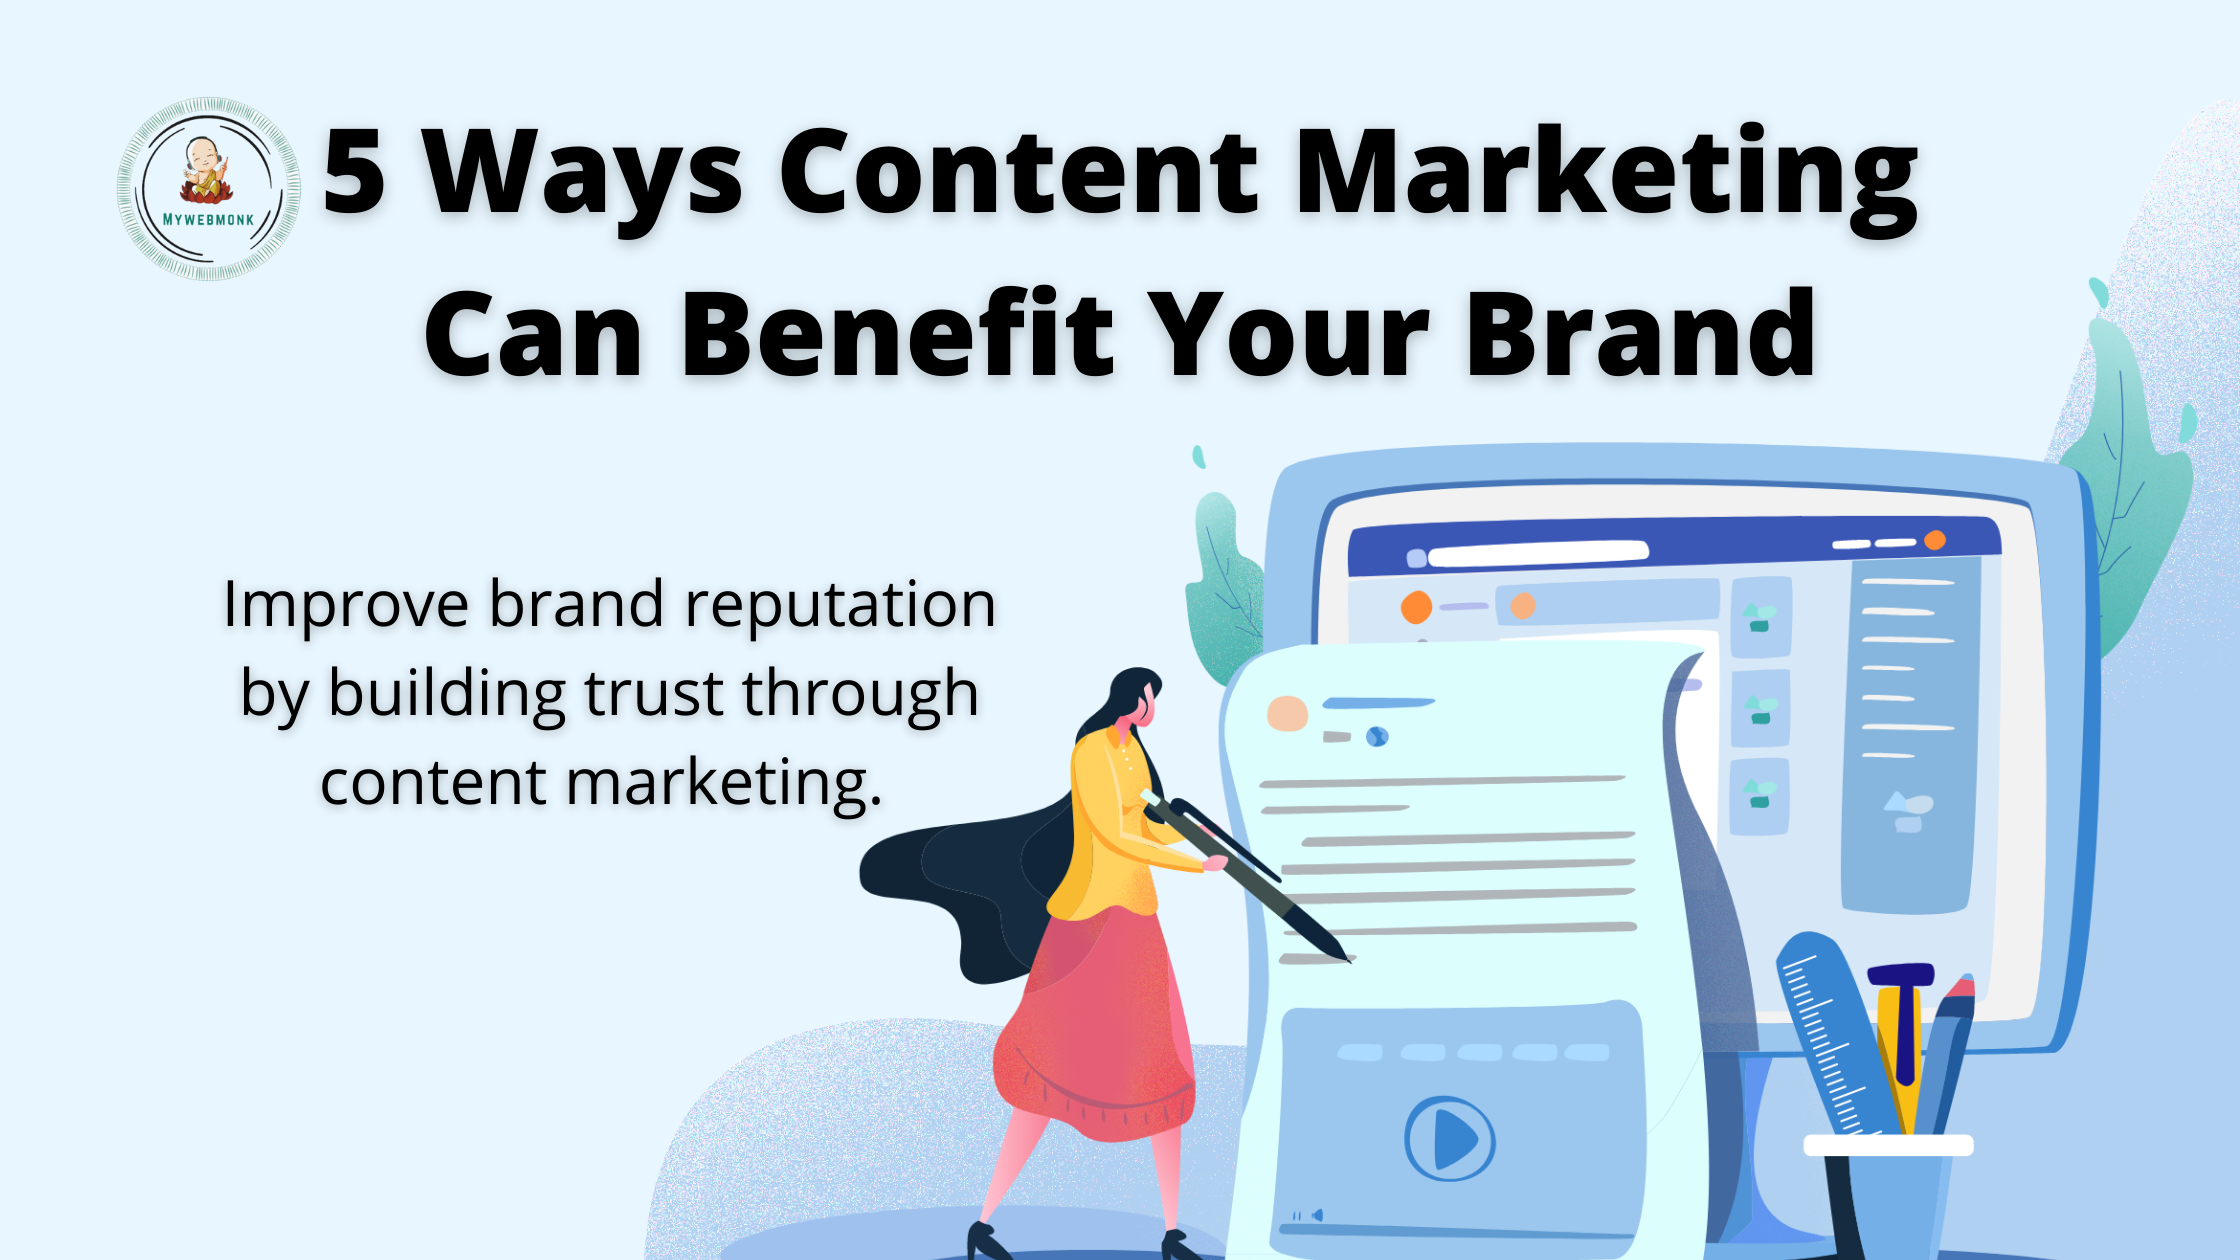 5-Ways-Content-Marketing-Can-Benefit-Your-Brand-2.png